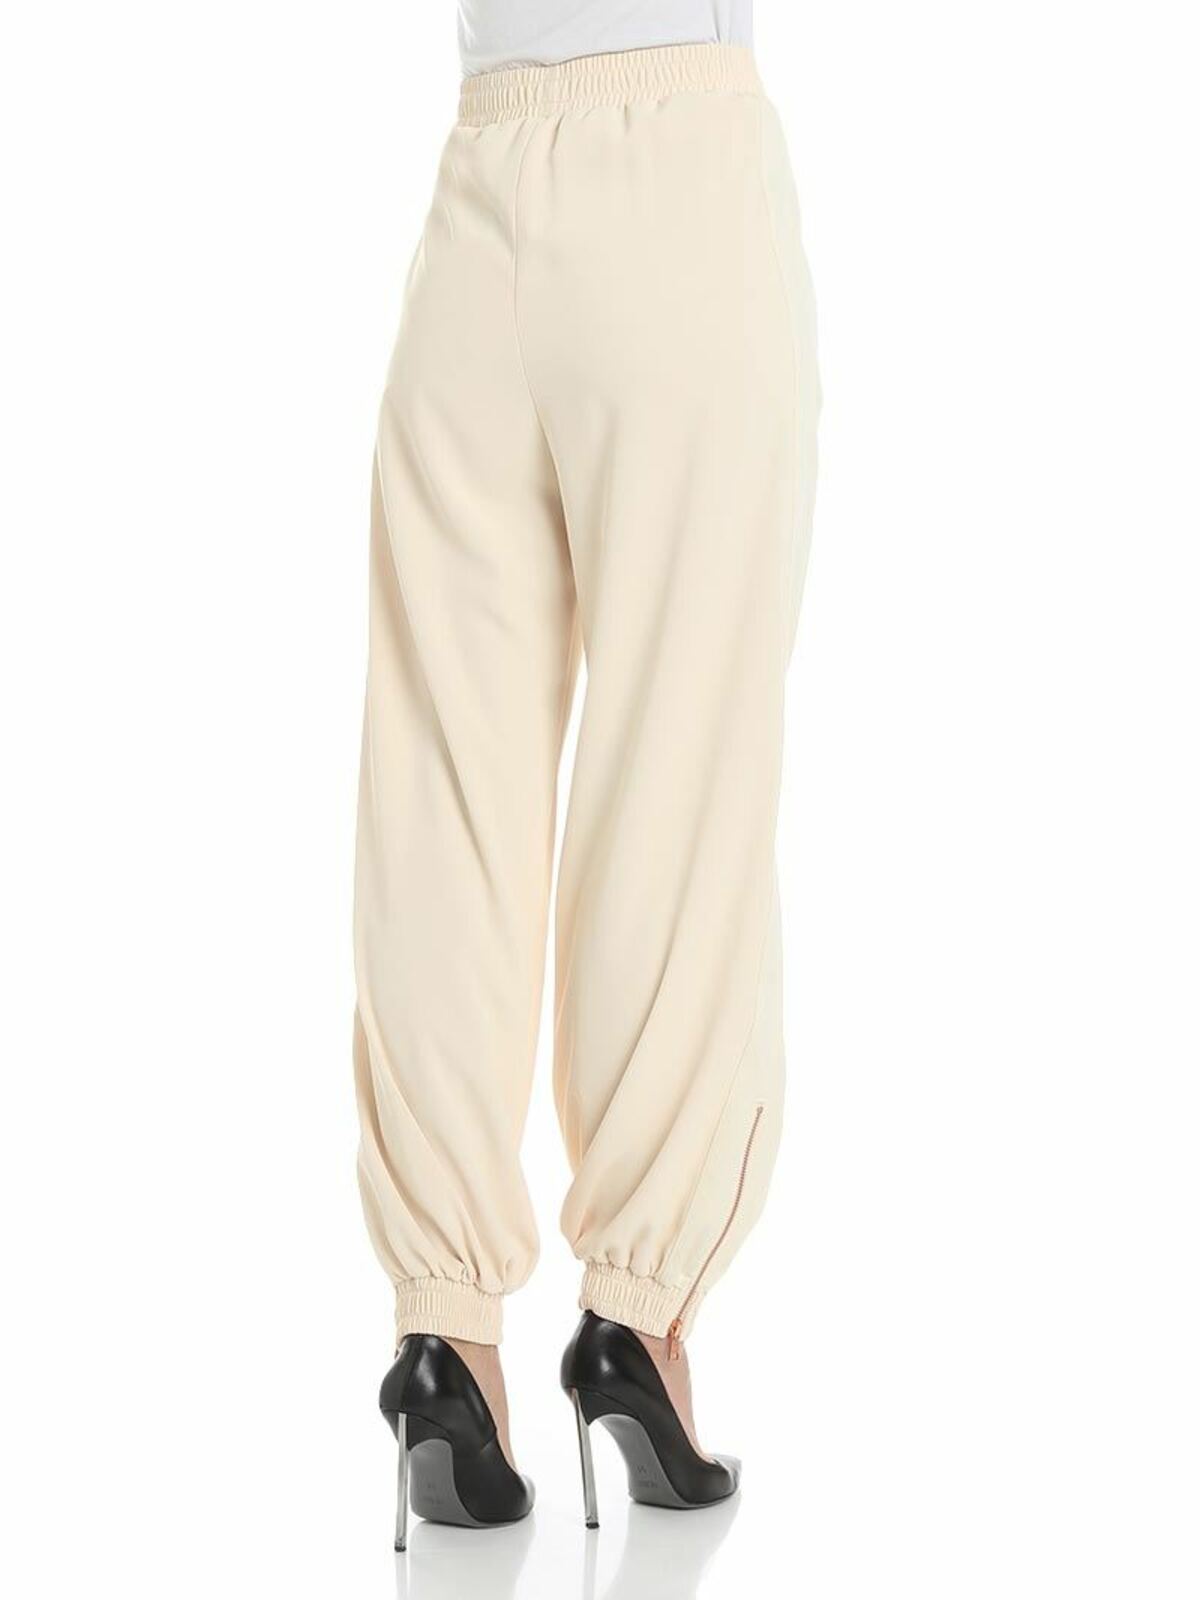 Shop See By Chloé Cream-colored Trousers